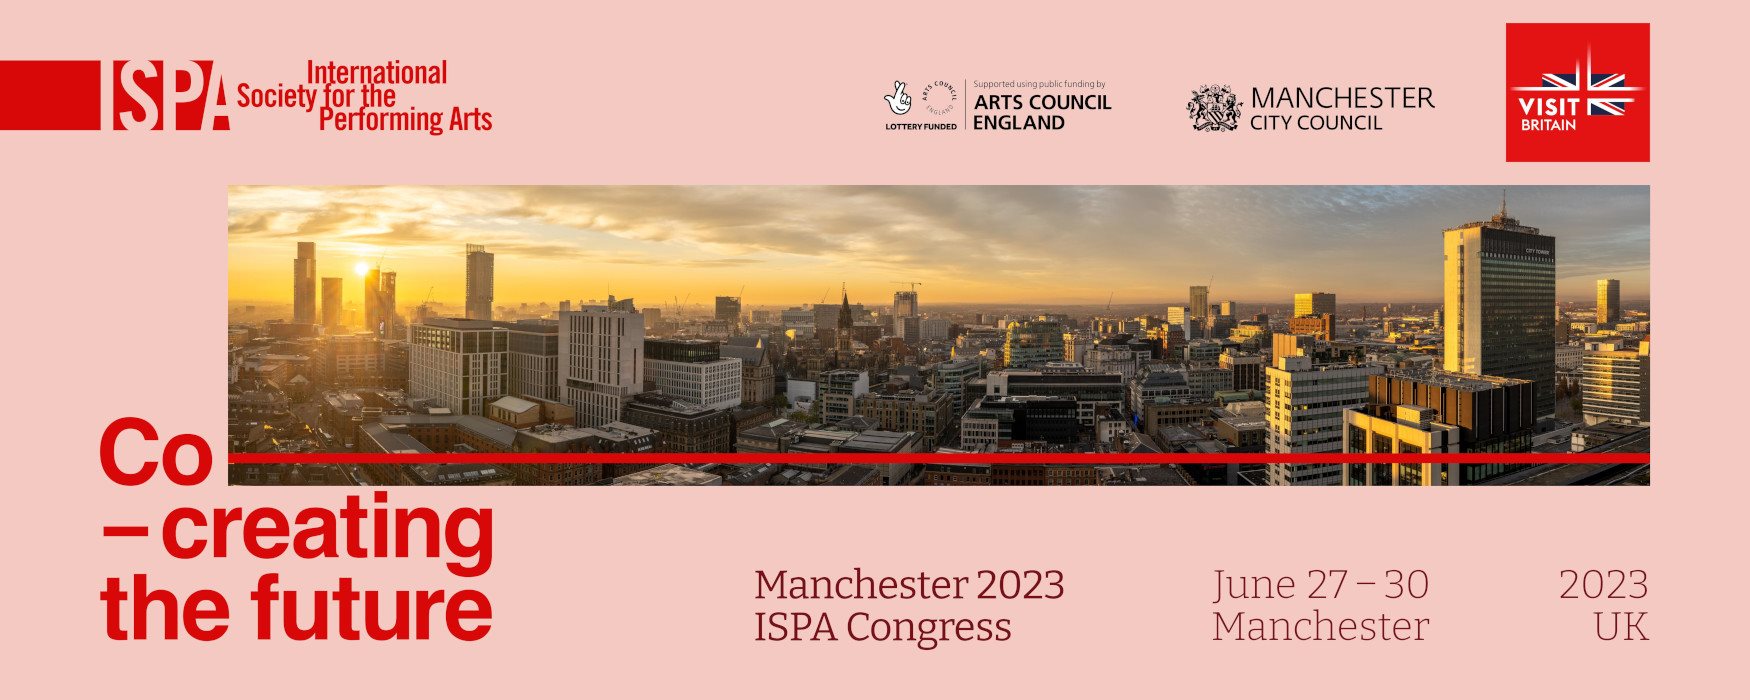 Designed asset promoting the Manchester 2023 ISPA Congress in Manchester